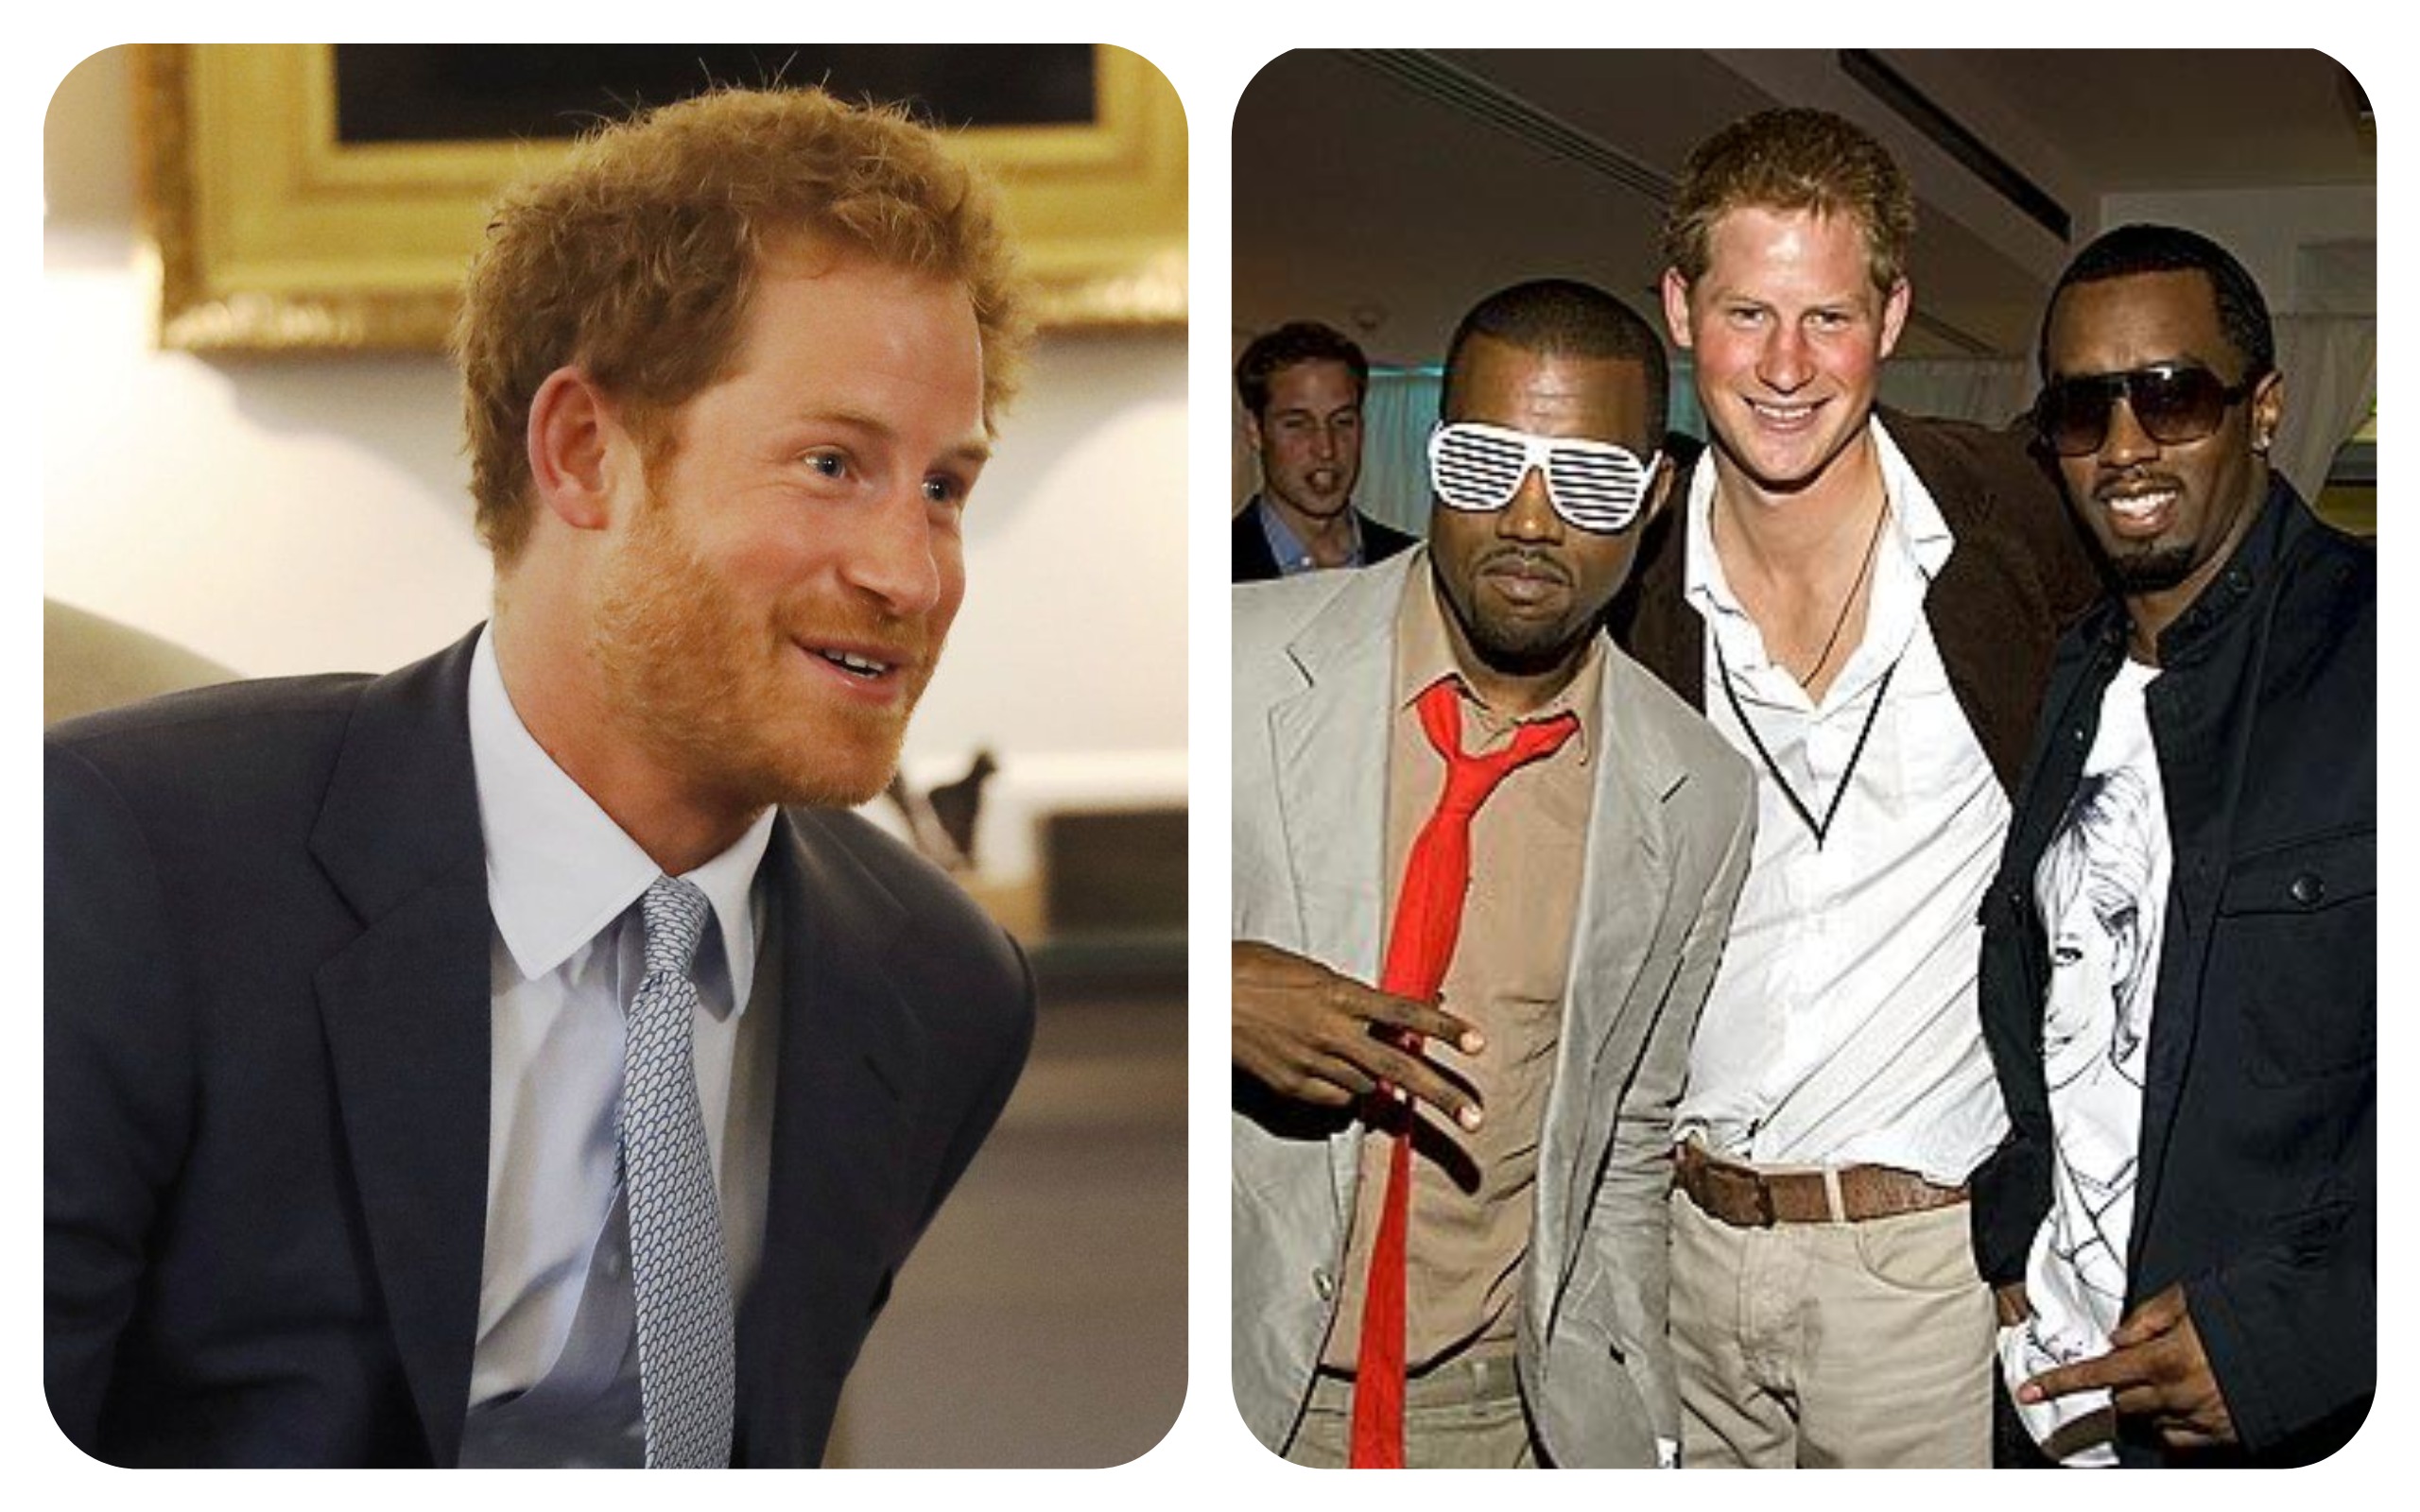 Prince Harry Sean "Diddy" Combs